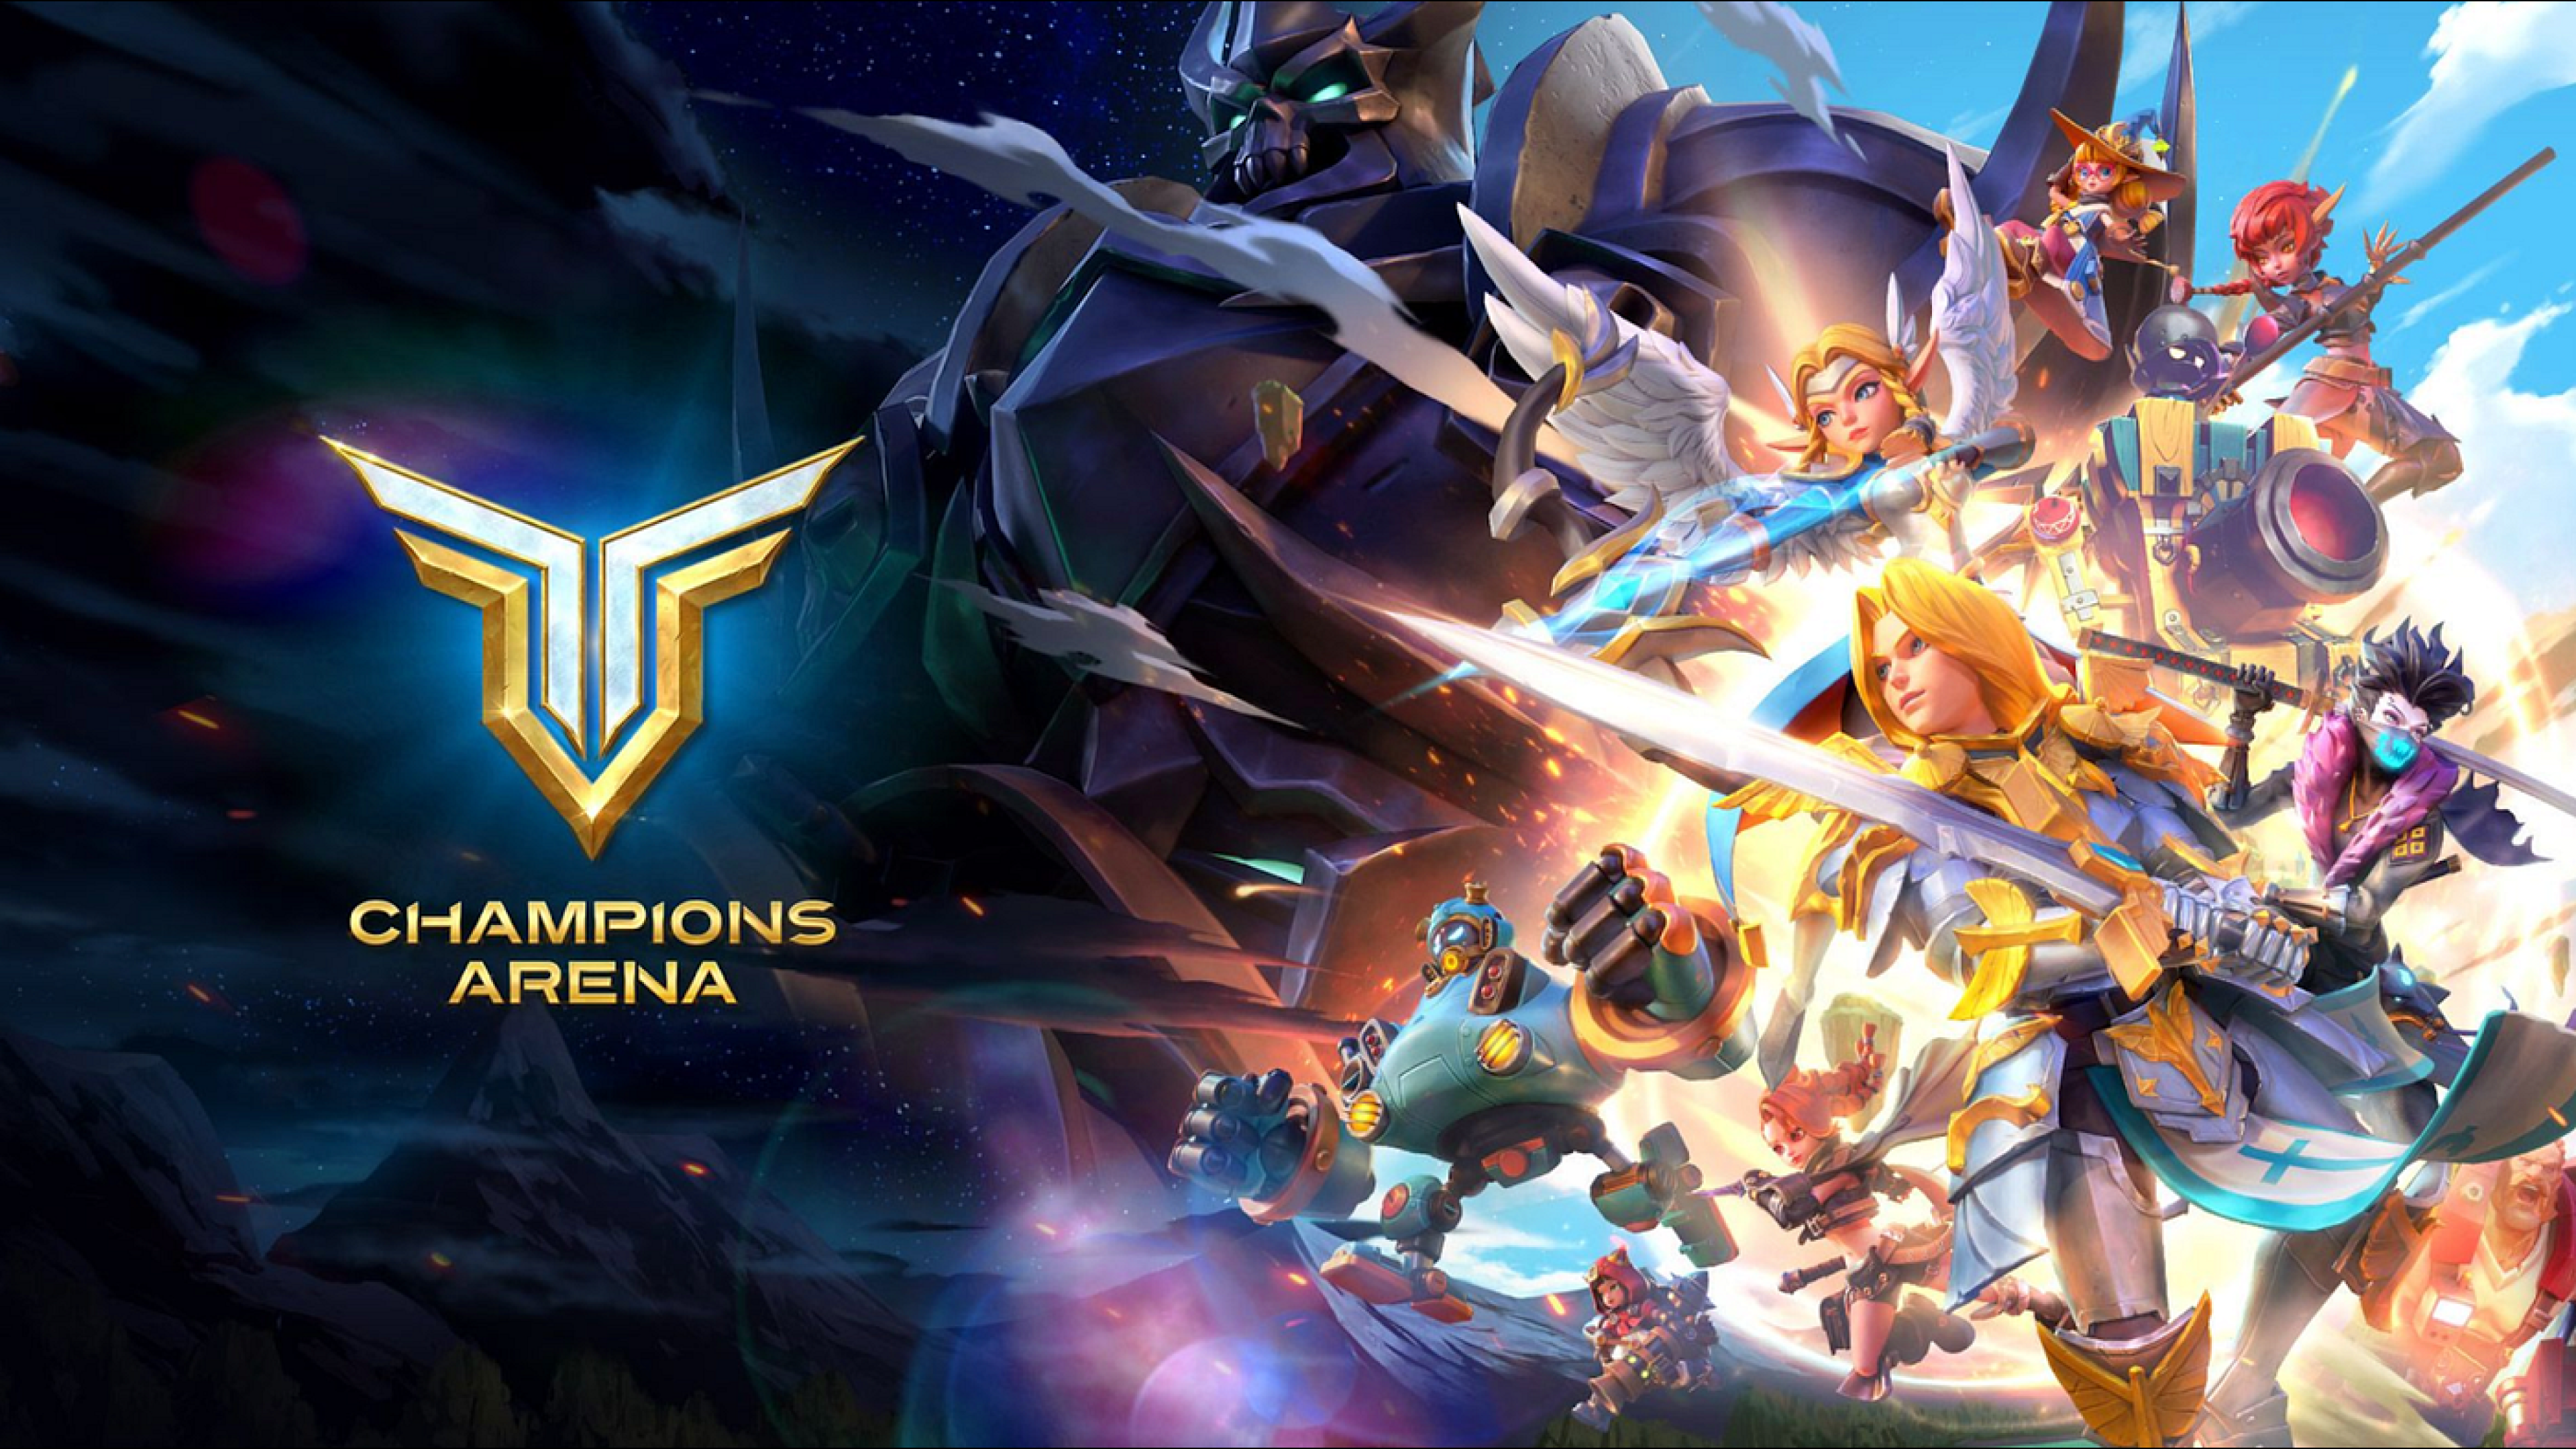 Champions Arena is an epic mobile RPG battle game from Gala Games!